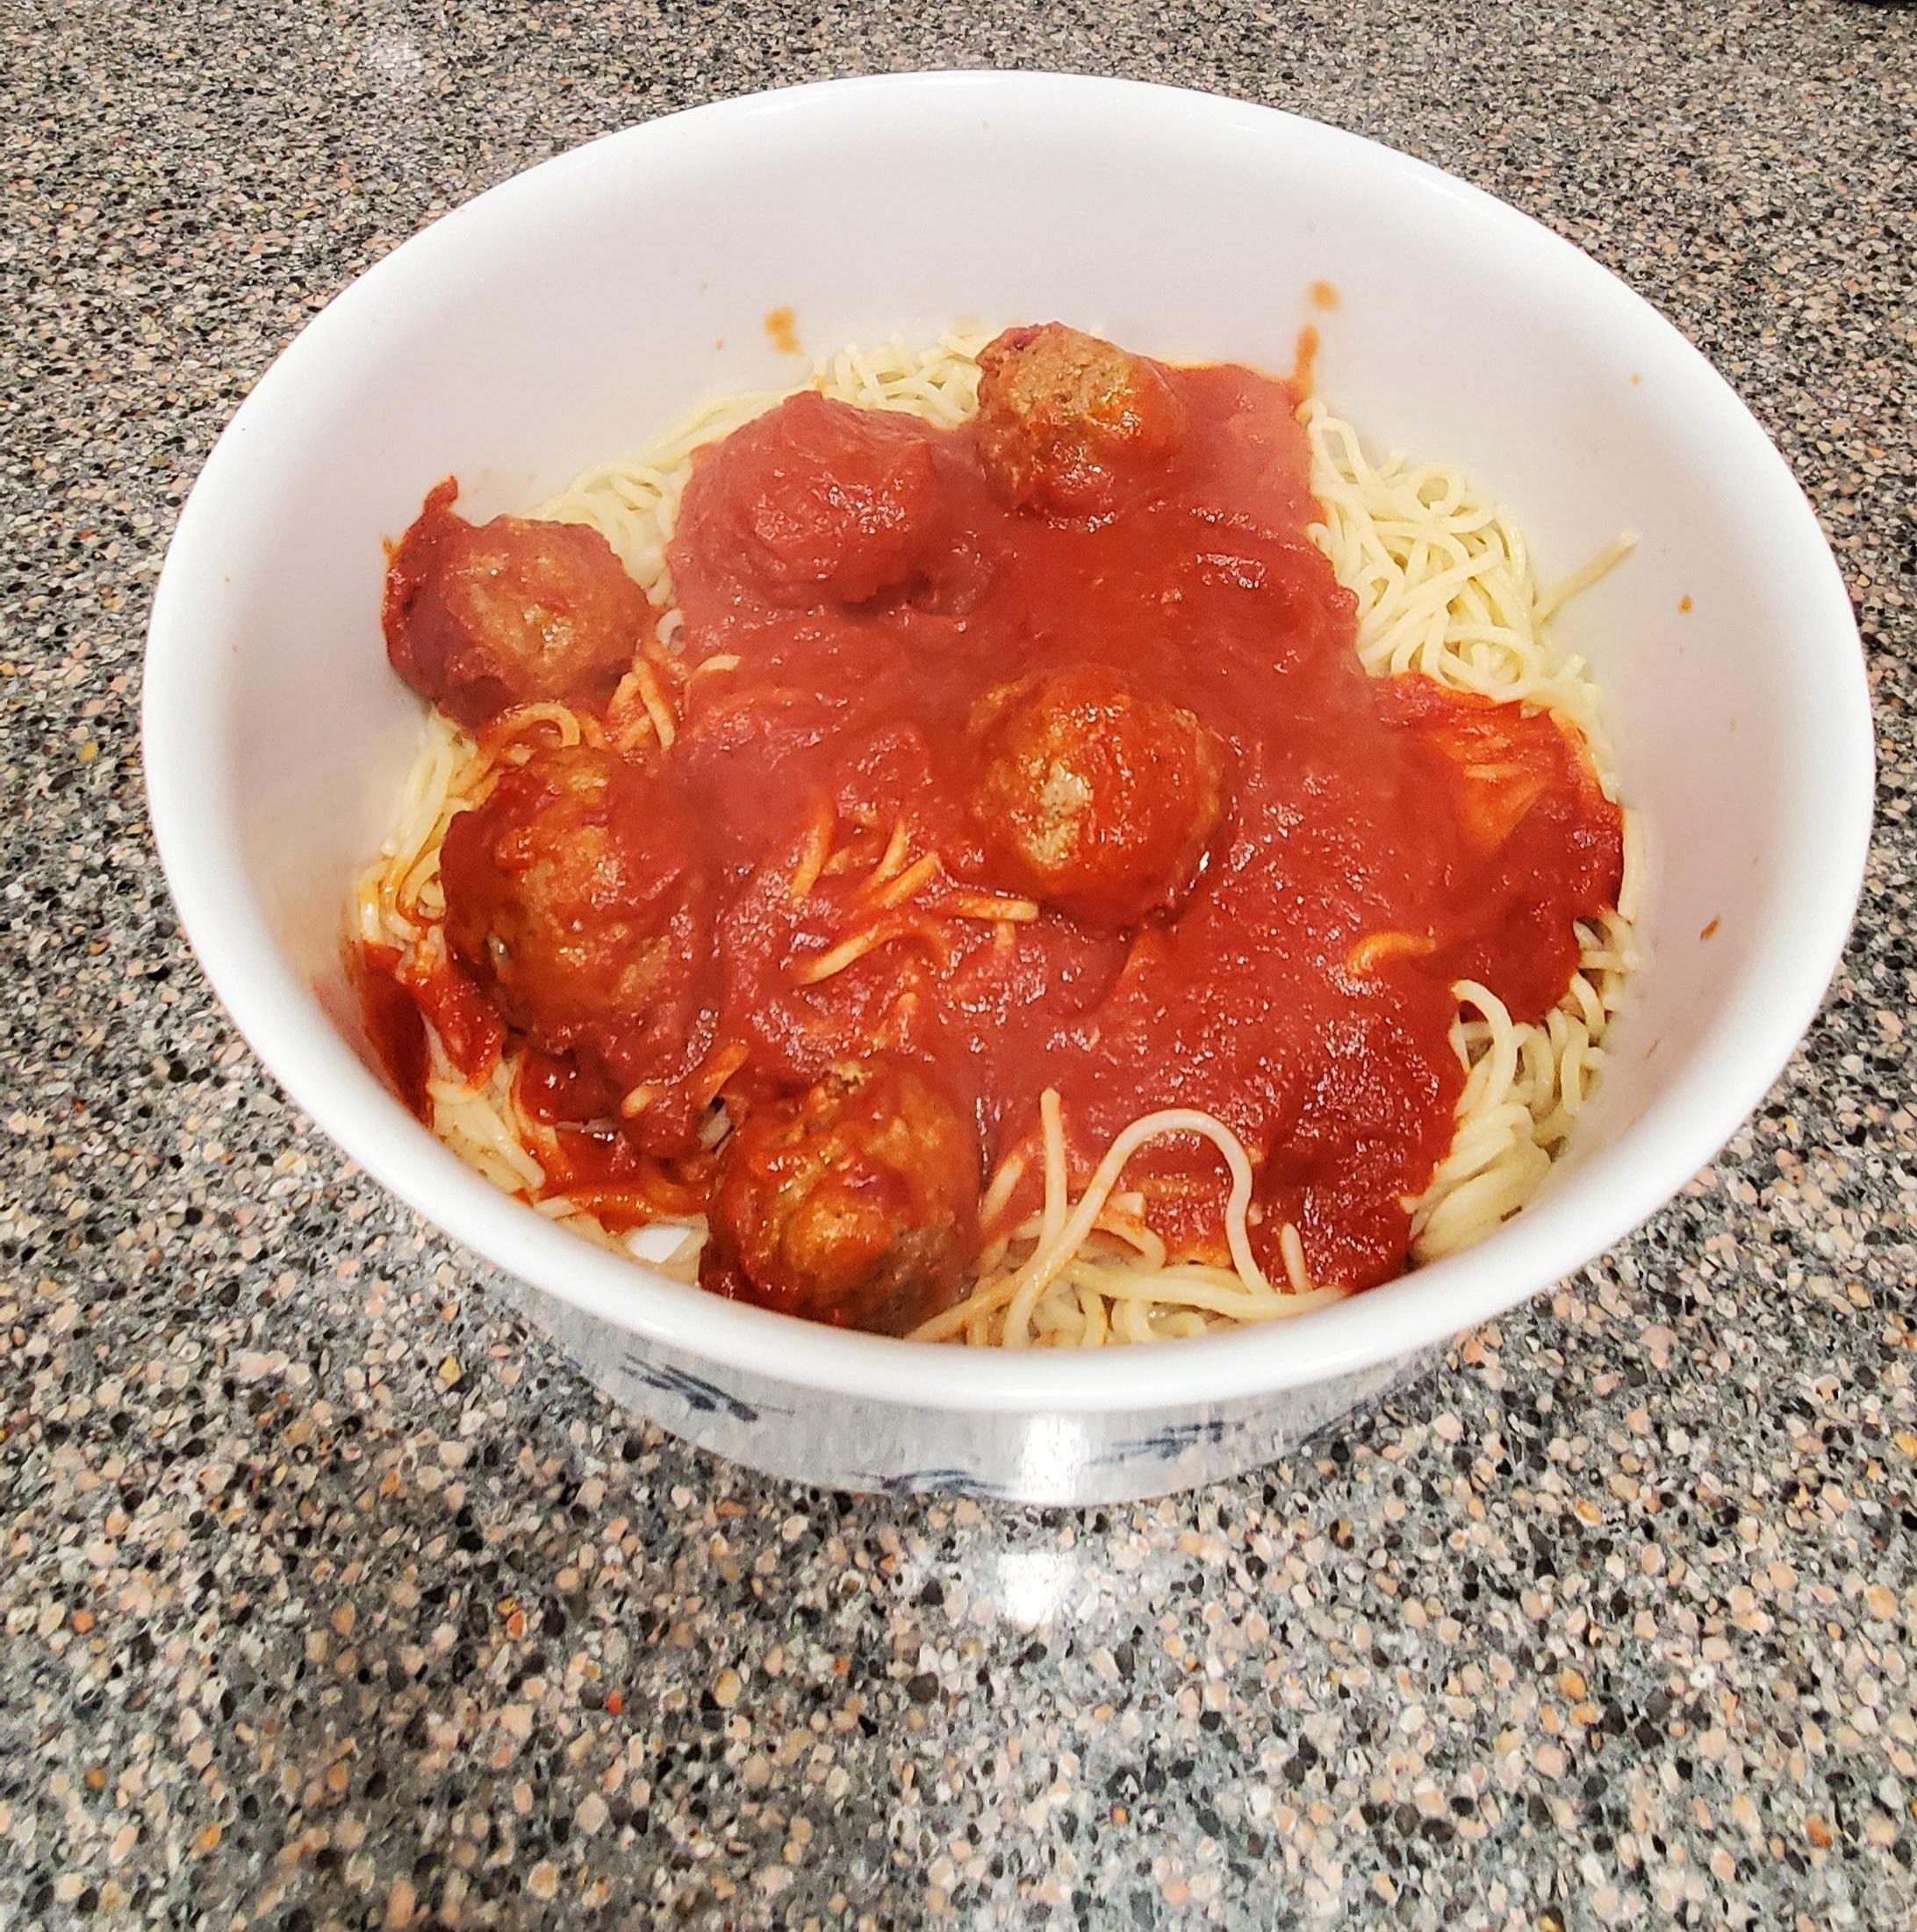 The Best Meatballs in the World